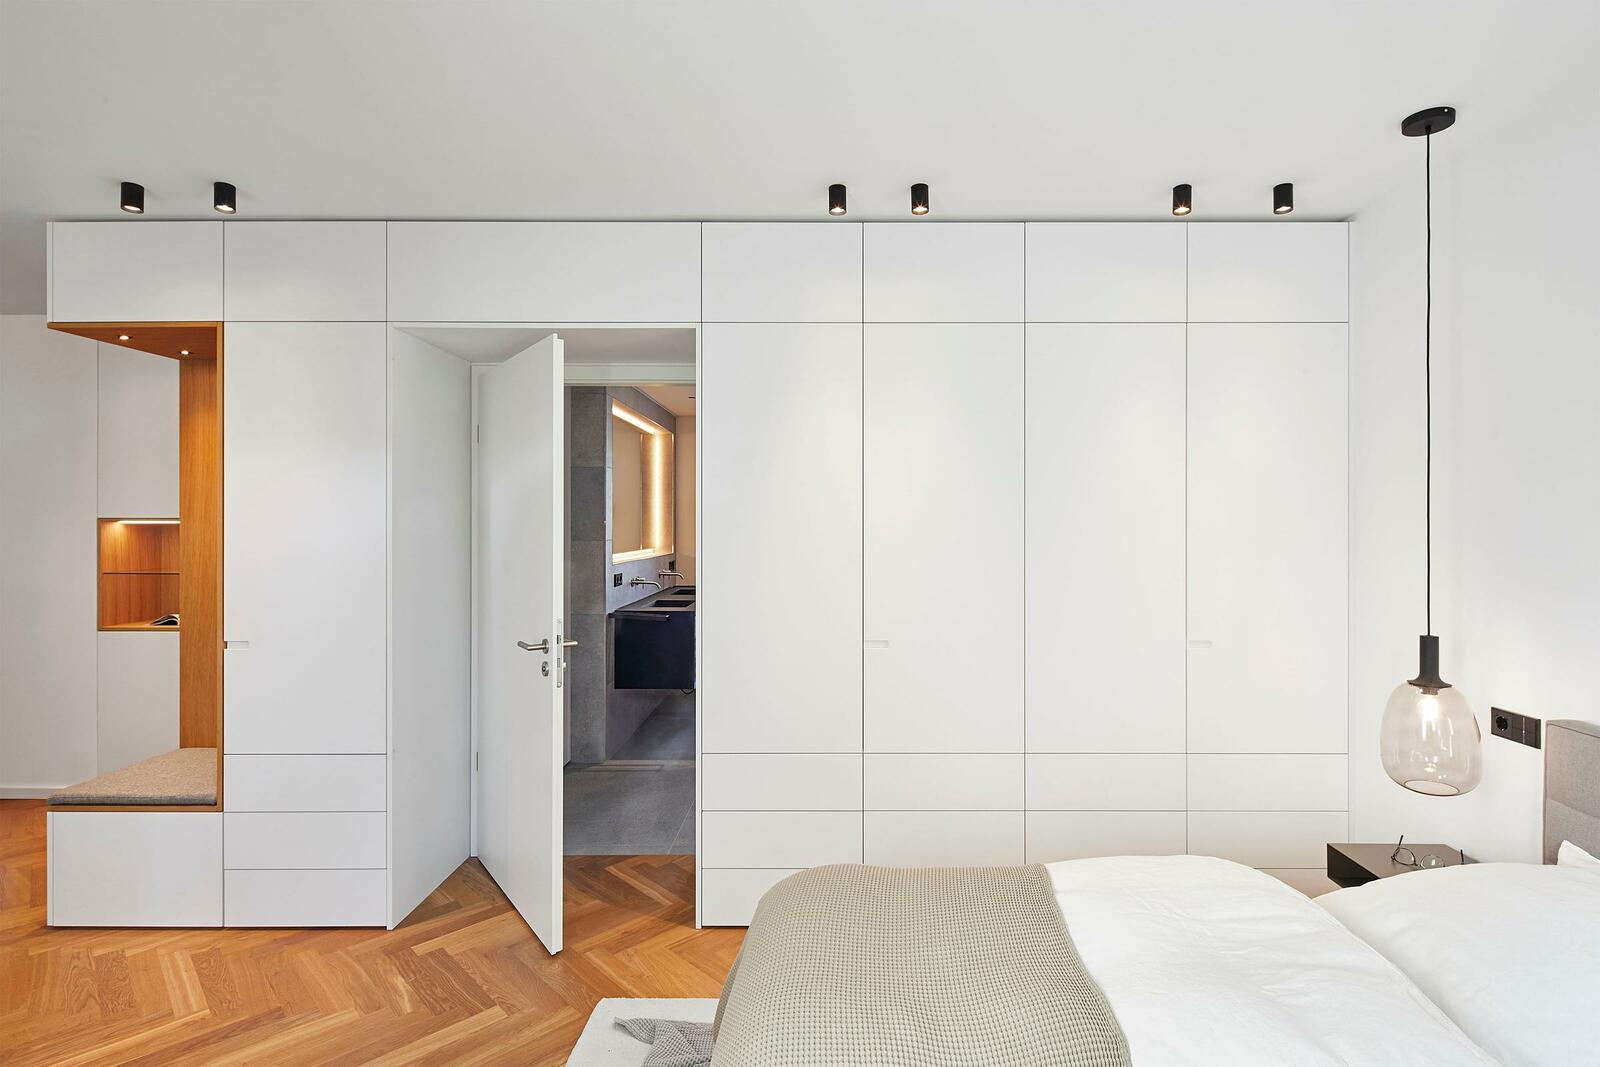 This bedroom project from Zeitwerk Design is timeless and functional. 